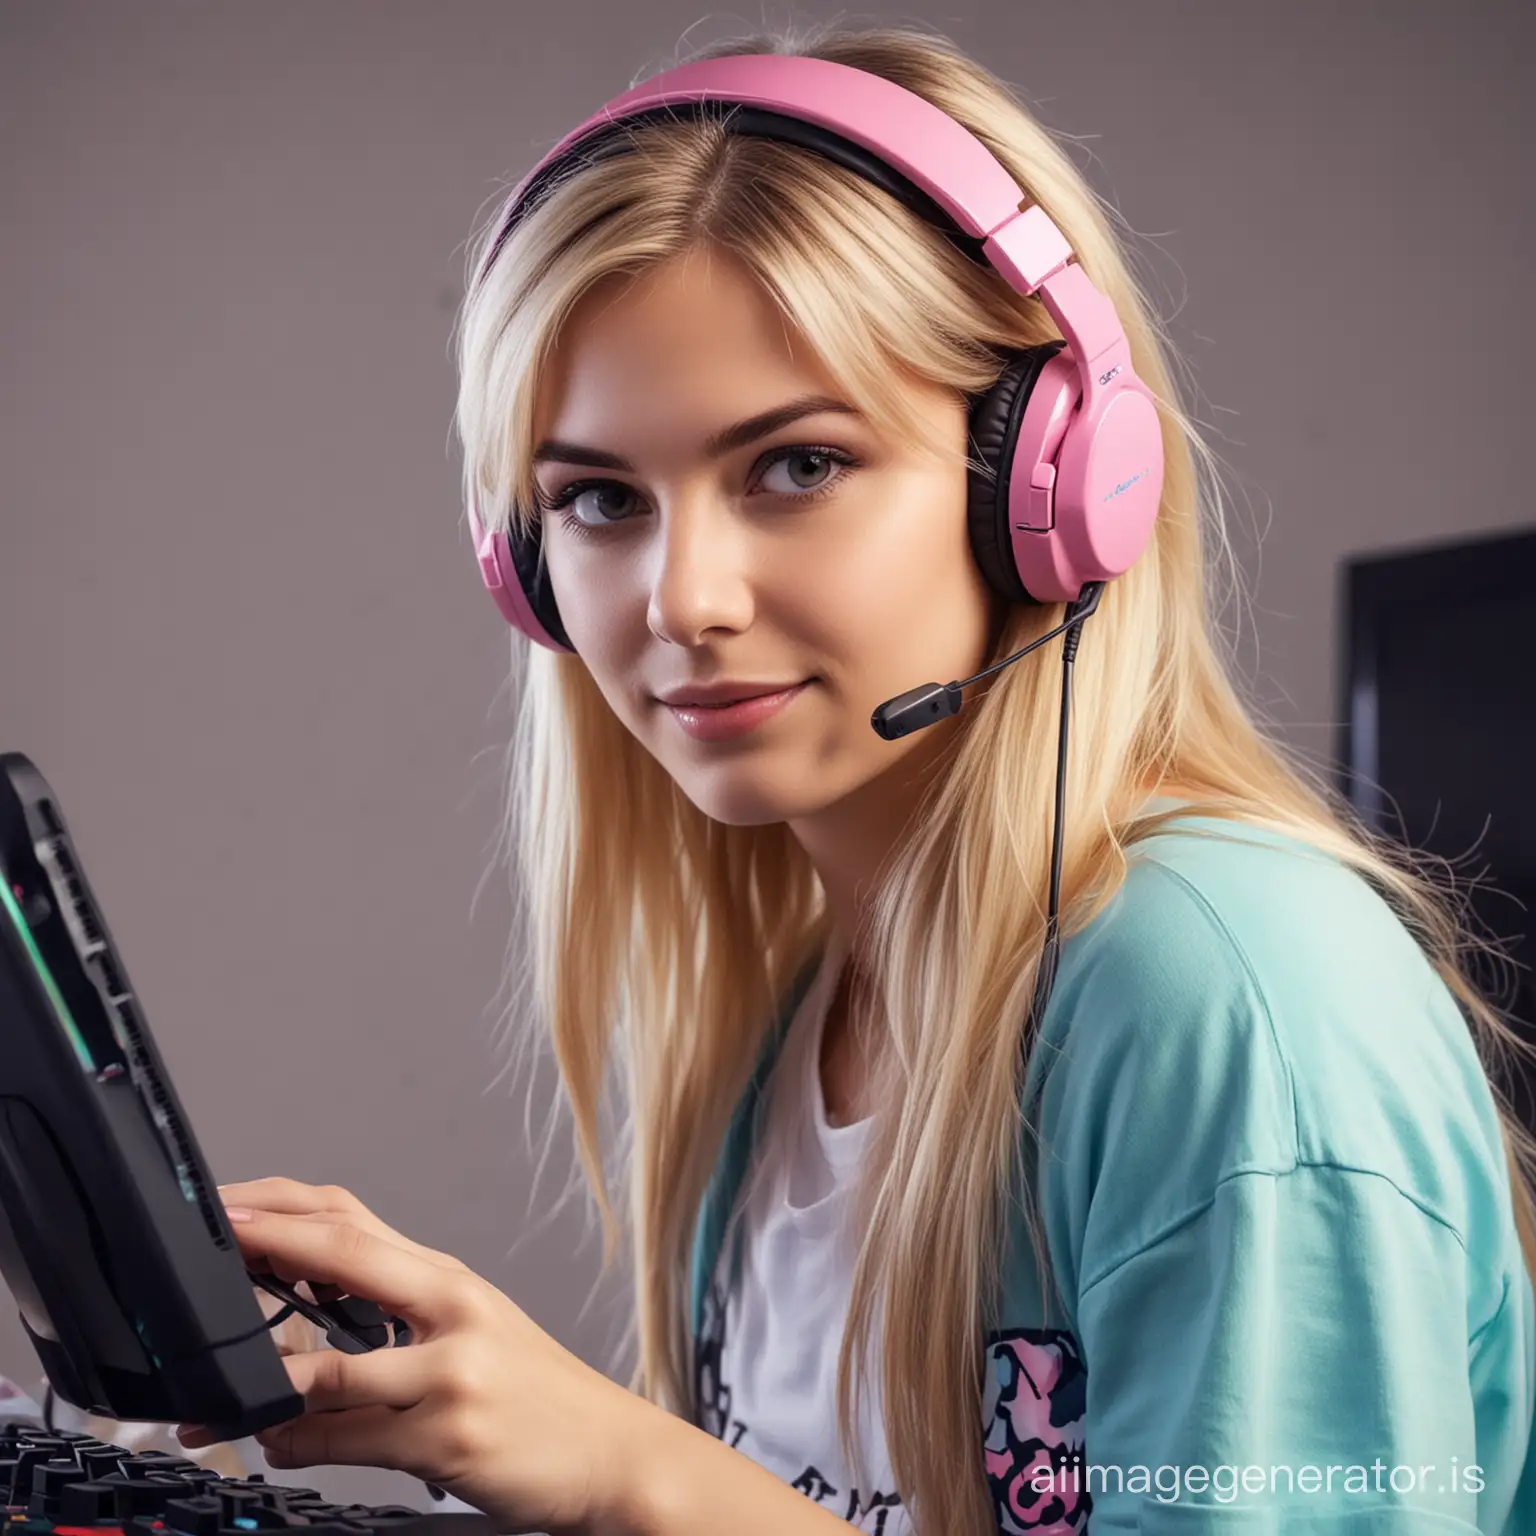 Young-Girl-Engaged-in-Video-Gaming-Fun